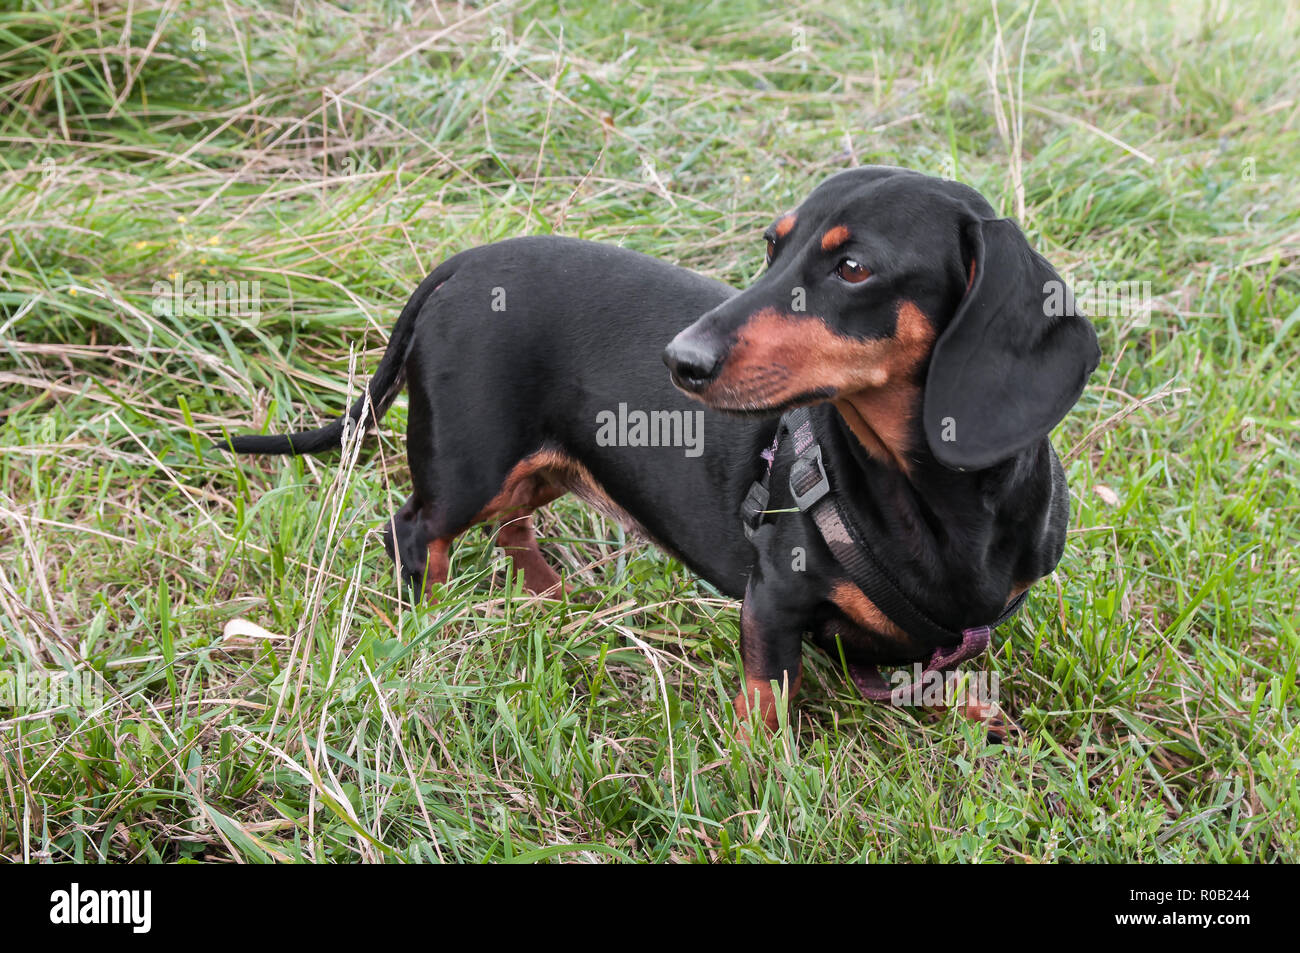 Portrait Of A Dog Dachshund Black Tan Standing In Full Length On Grass Stock Photo Alamy